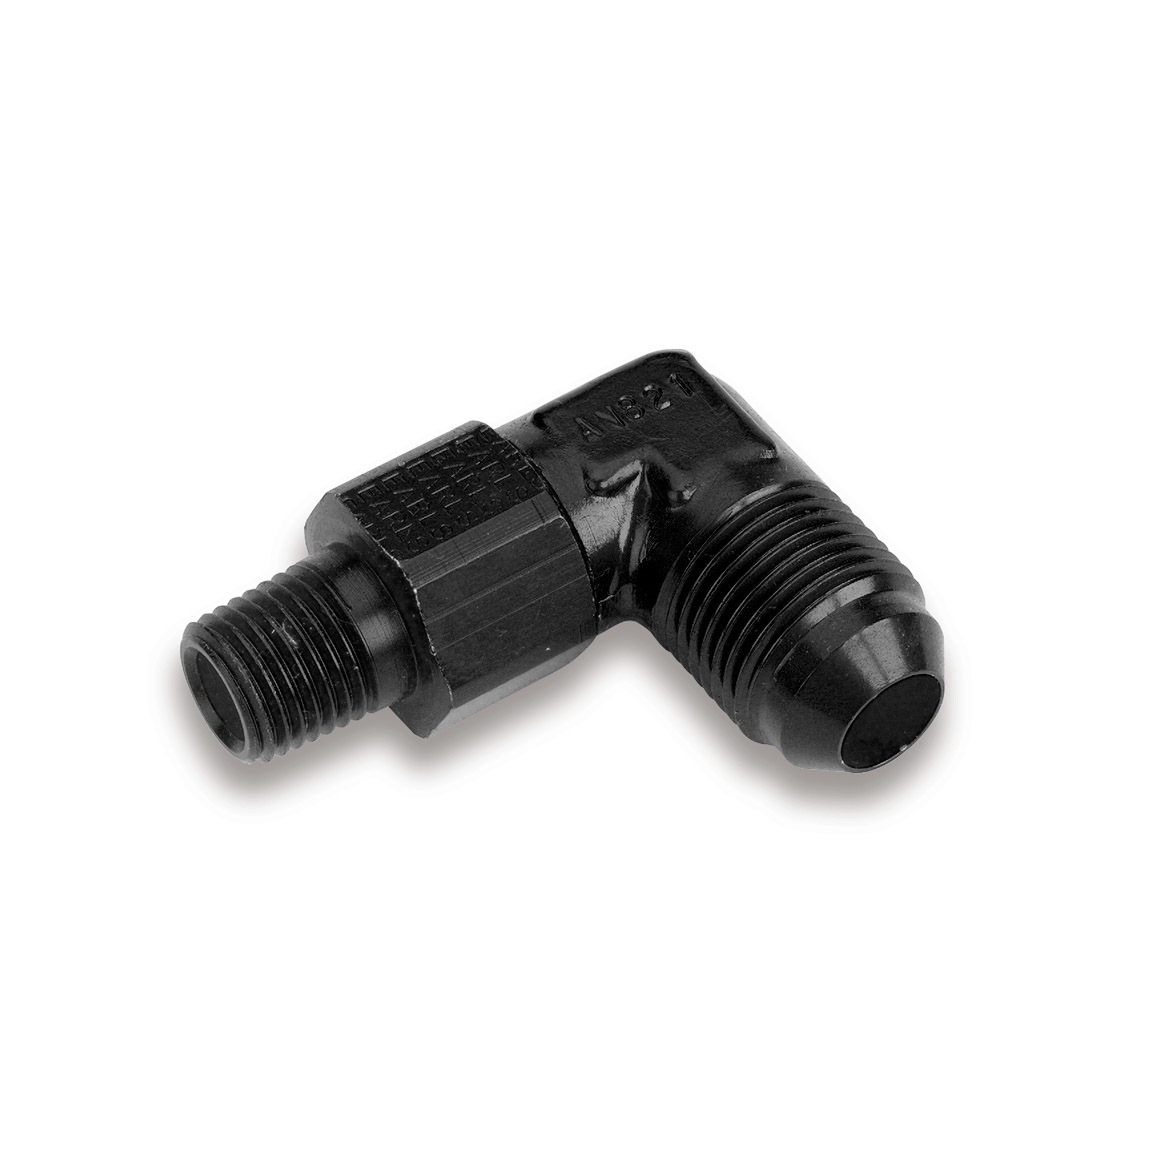 Earls AT922111ERL Fitting, Adapter, 90 Degree, 10 AN Male to 3/8 in NPT Male Swivel, Aluminum, Black Anodized, Each